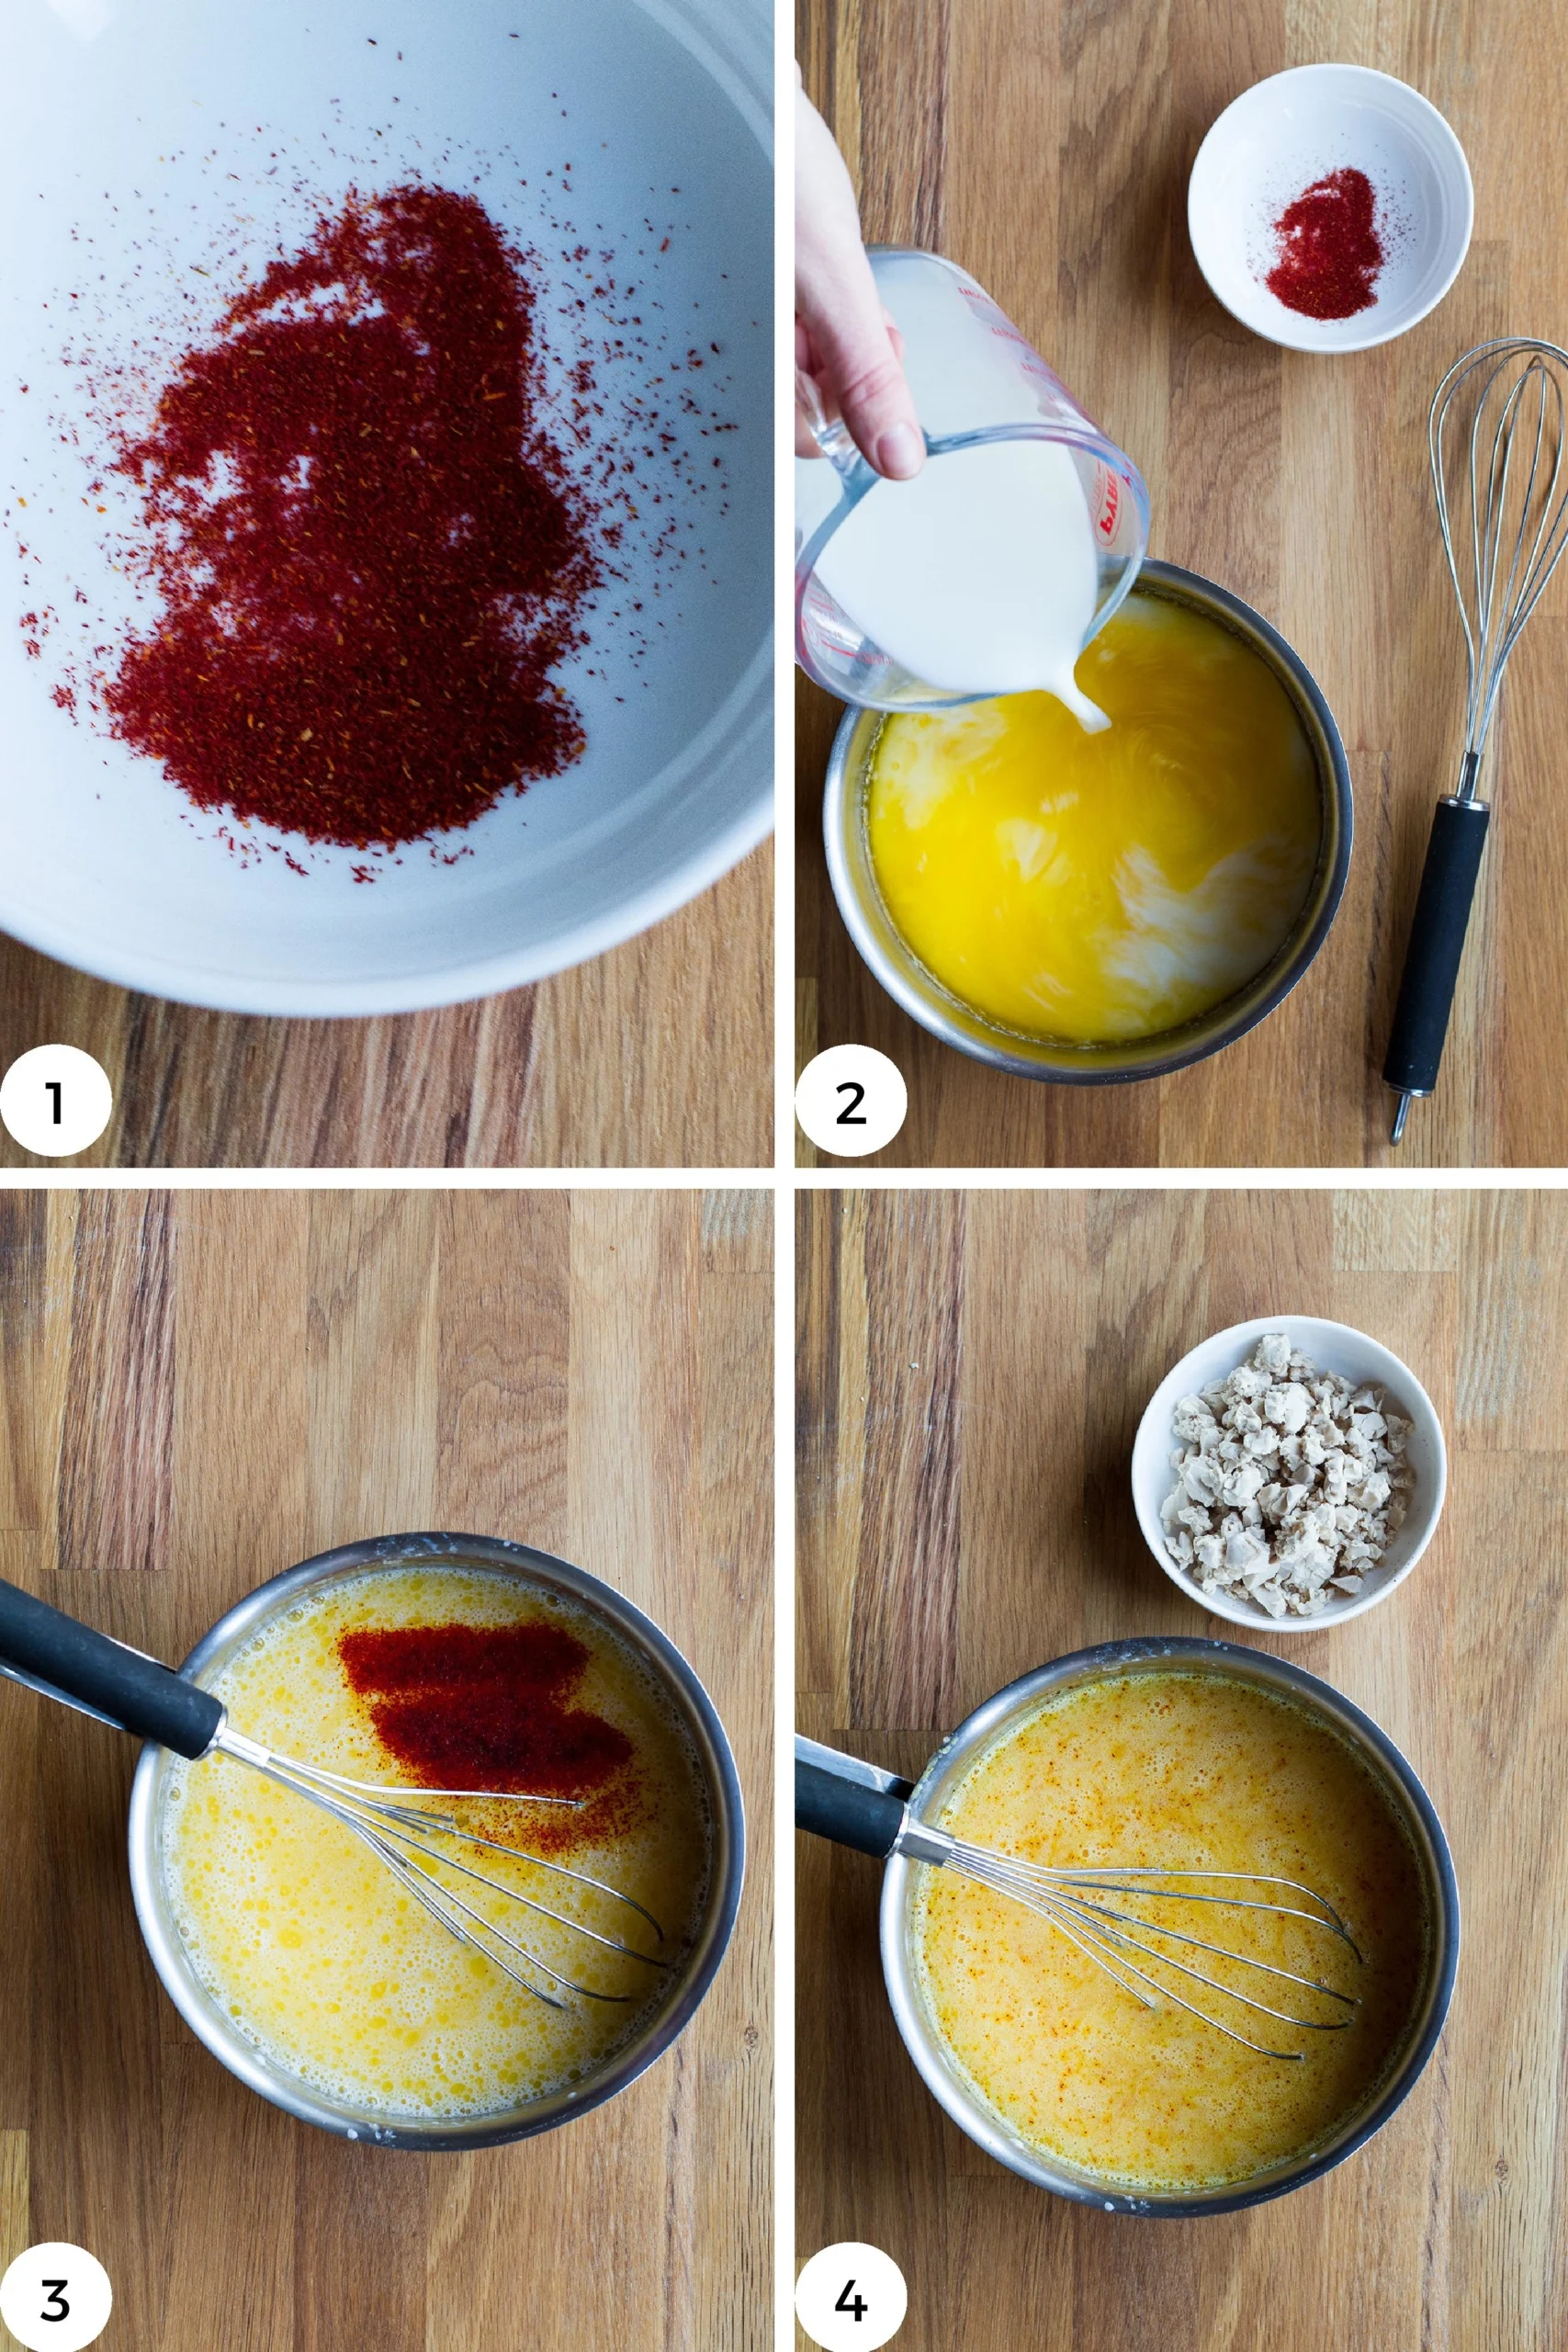 Steps to mix saffron with the milk.